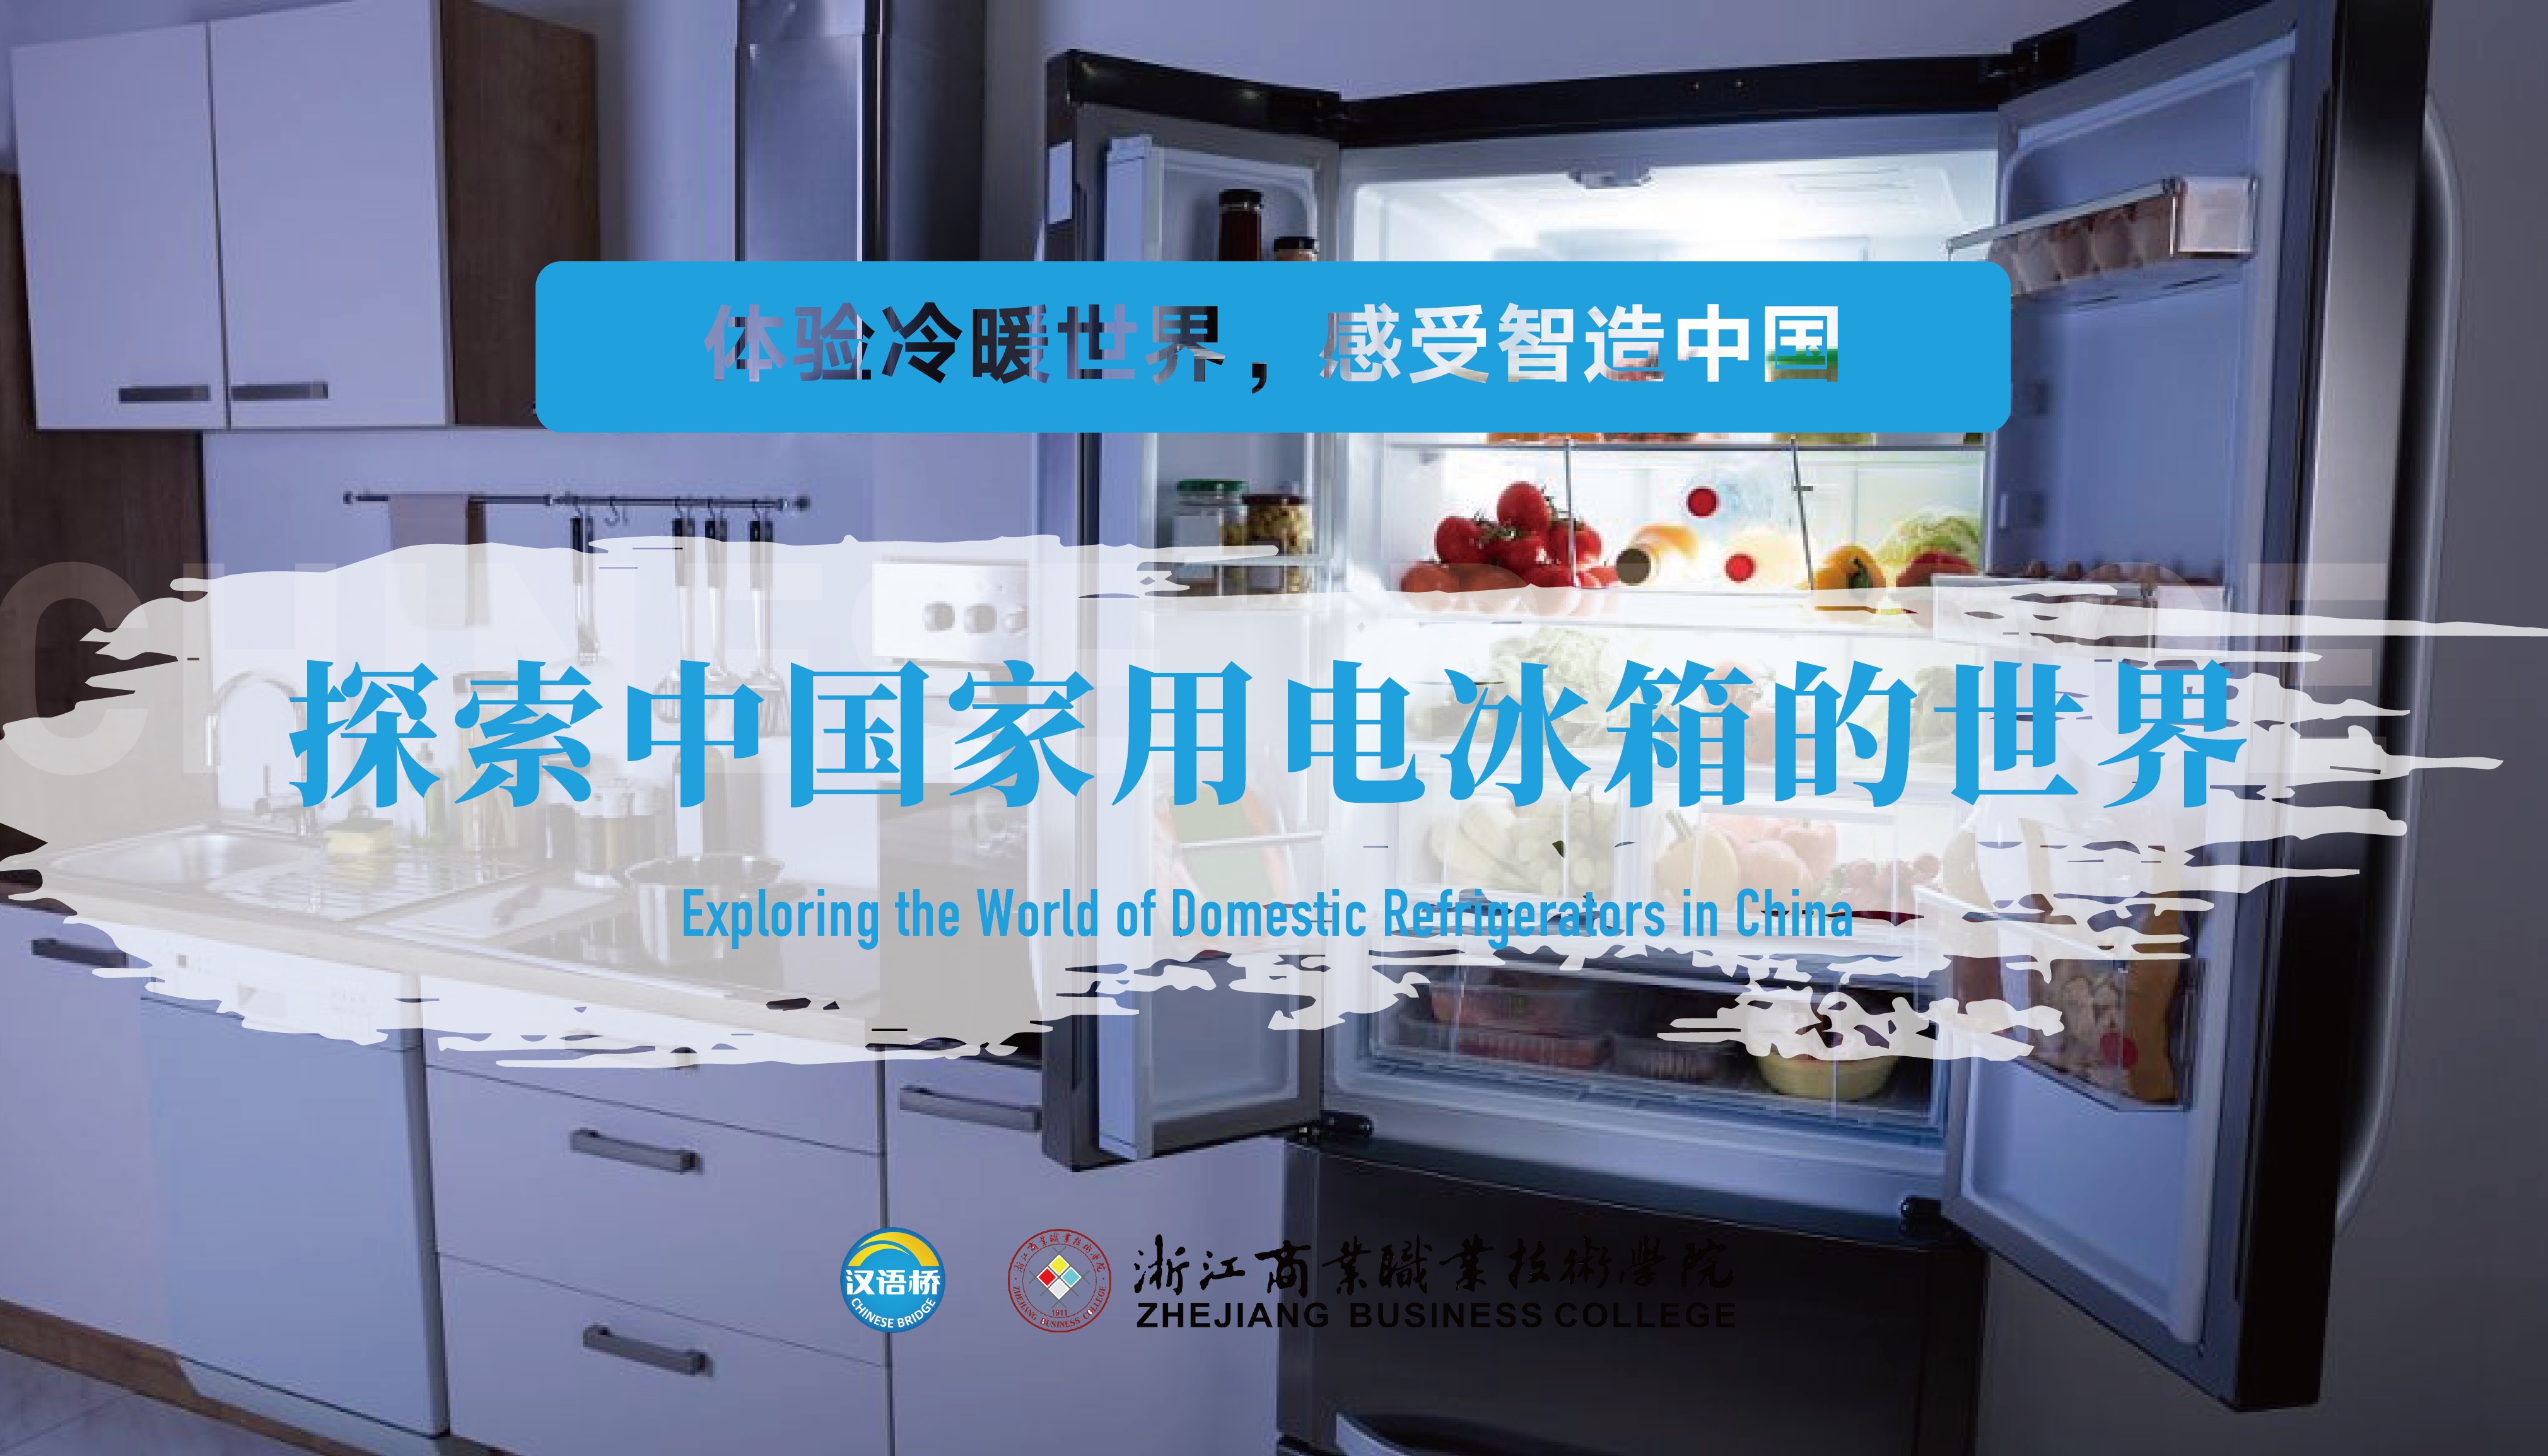 Exploring the World of Domestic Refrigerators in China